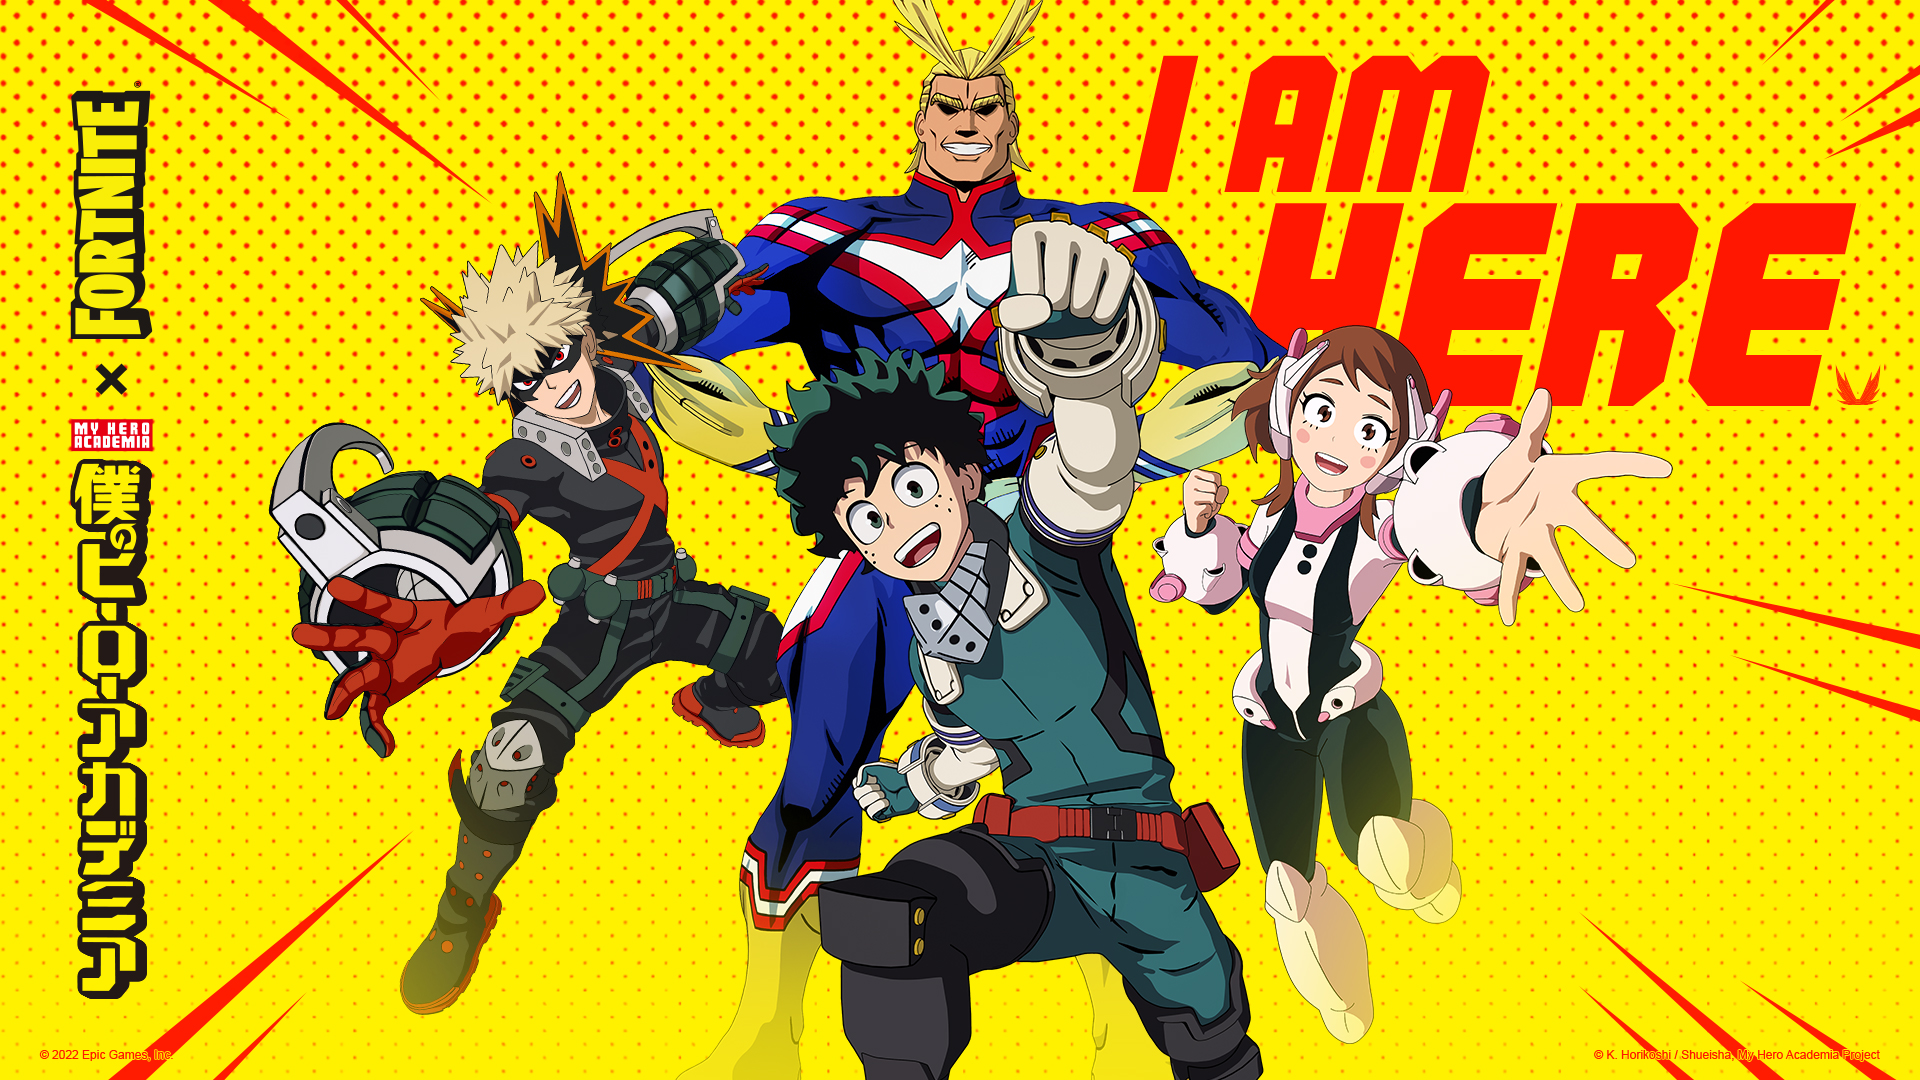 iFireMonkey on X: Starting now, check out the new limited-time My Hero  Academia Quests in Battle Royale/Zero Build and the Hero Training Gym  island (island code: 6917-7775-5190). Complete the Quests before December